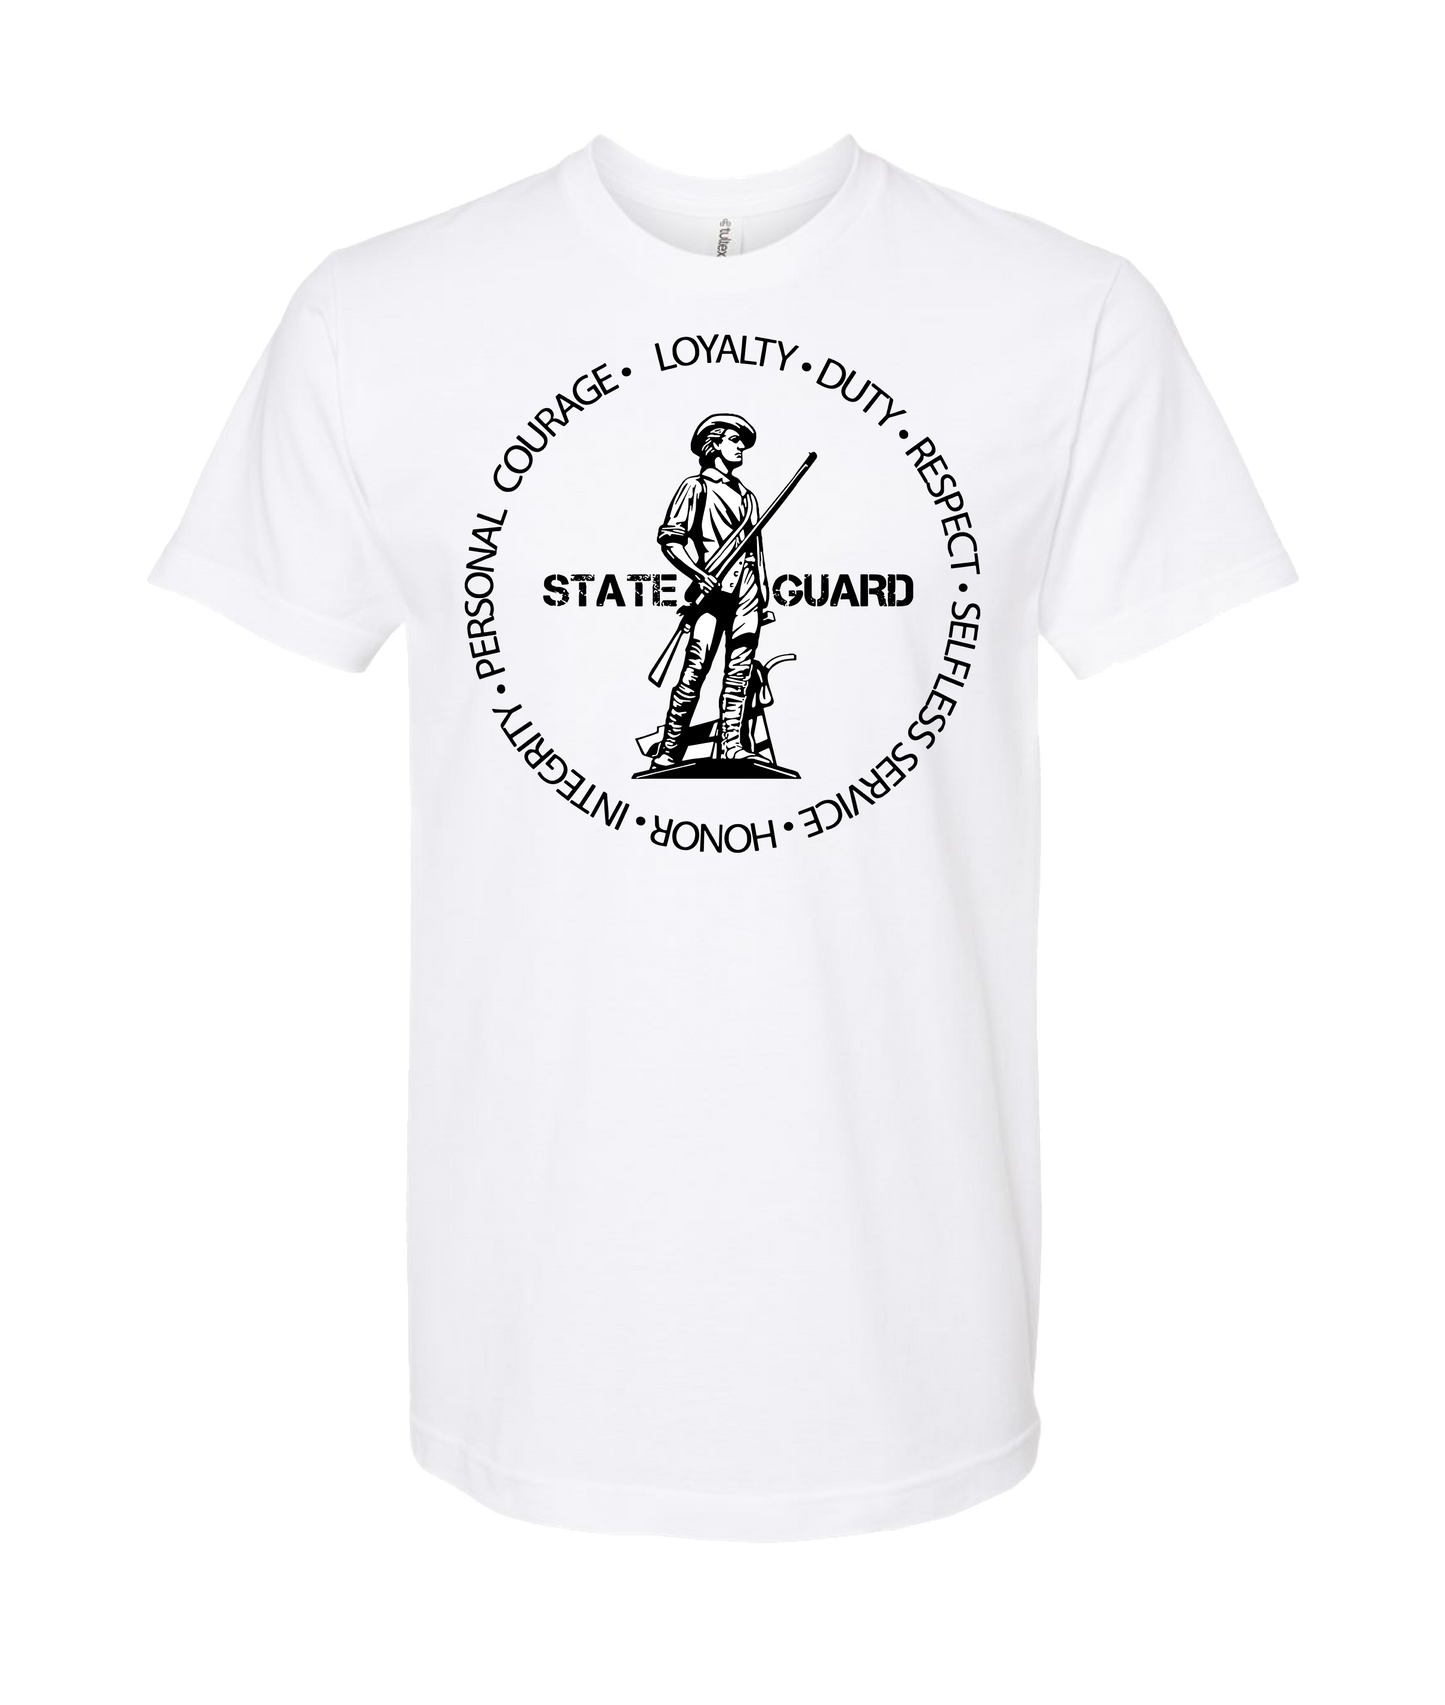 State Guard Apparel - STATE GUARD - White T Shirt